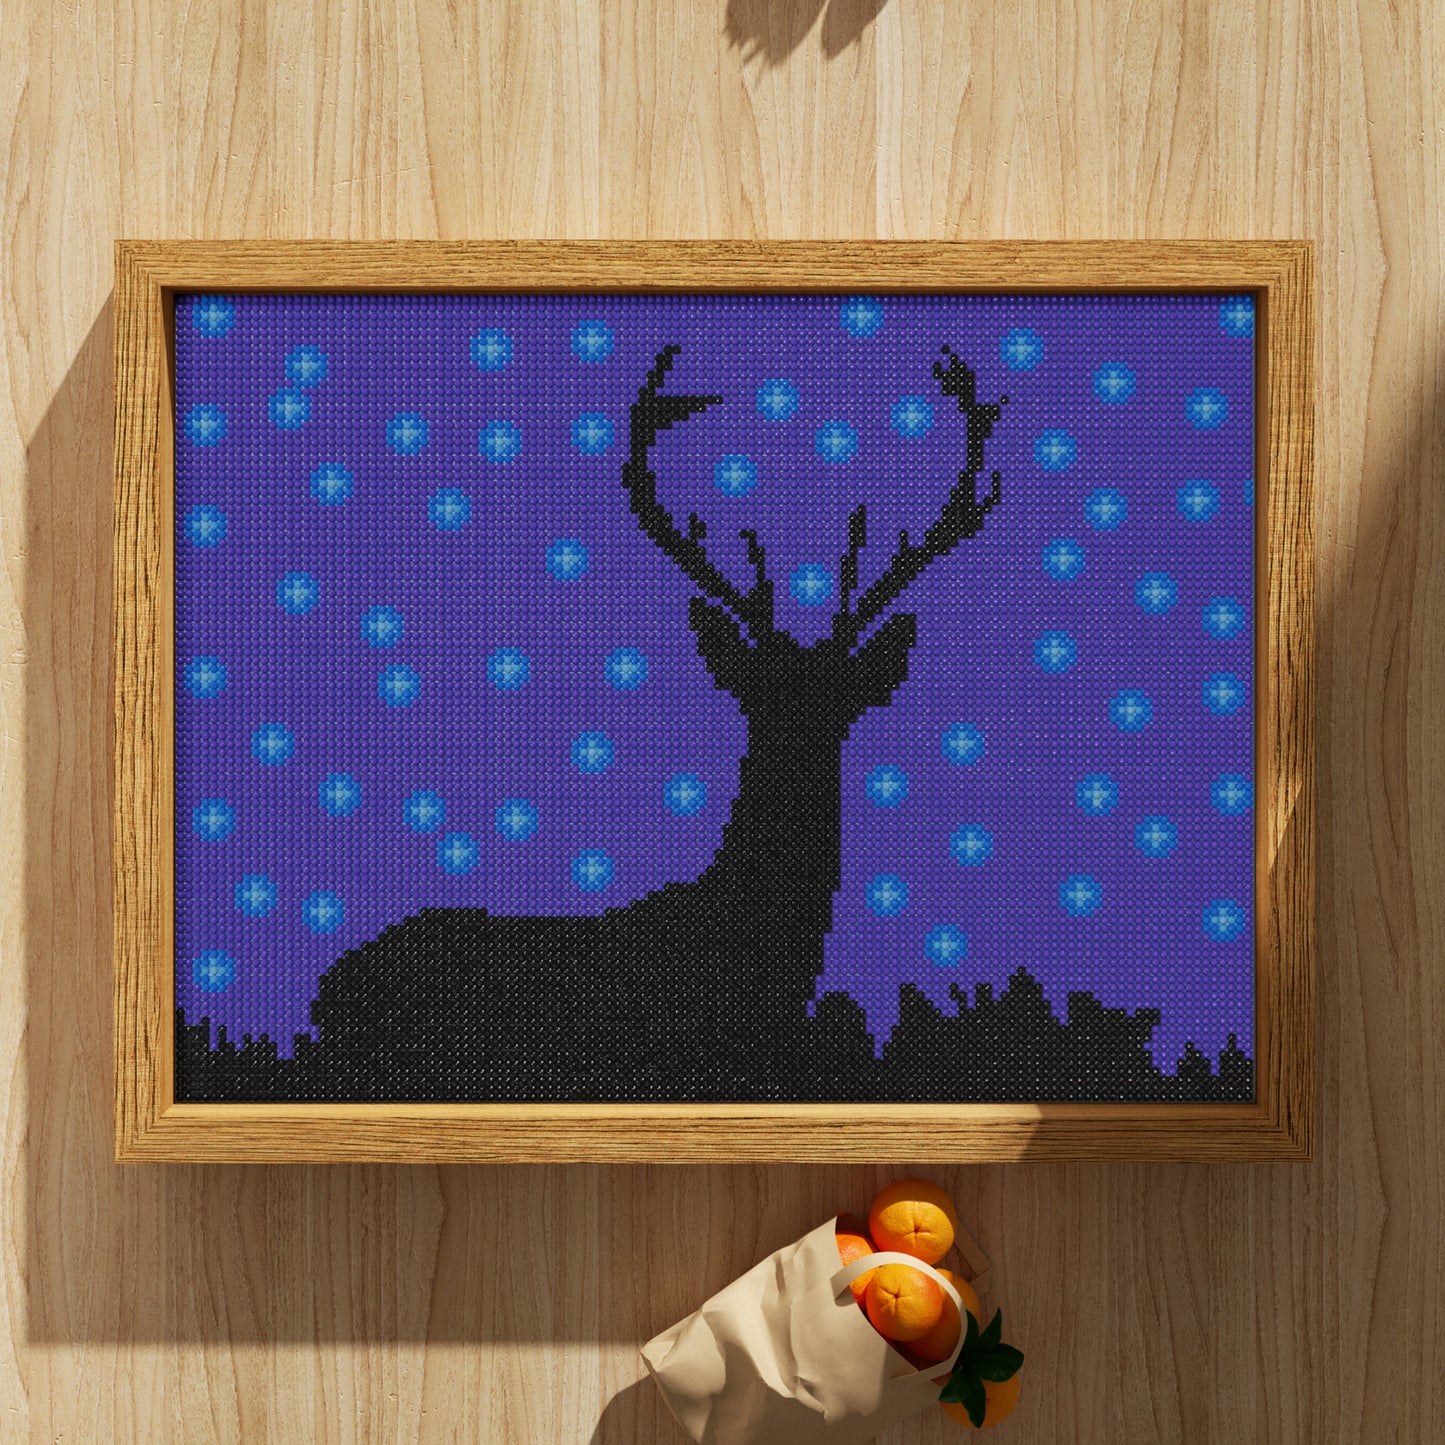 Night, a Deer Looking up at the Purple Sky Full of Stars, Simple Animal Theme Diamond Painting, 128*96 Dots, 26 Faces ABS Diamond, Elegant Solid Wood Frame